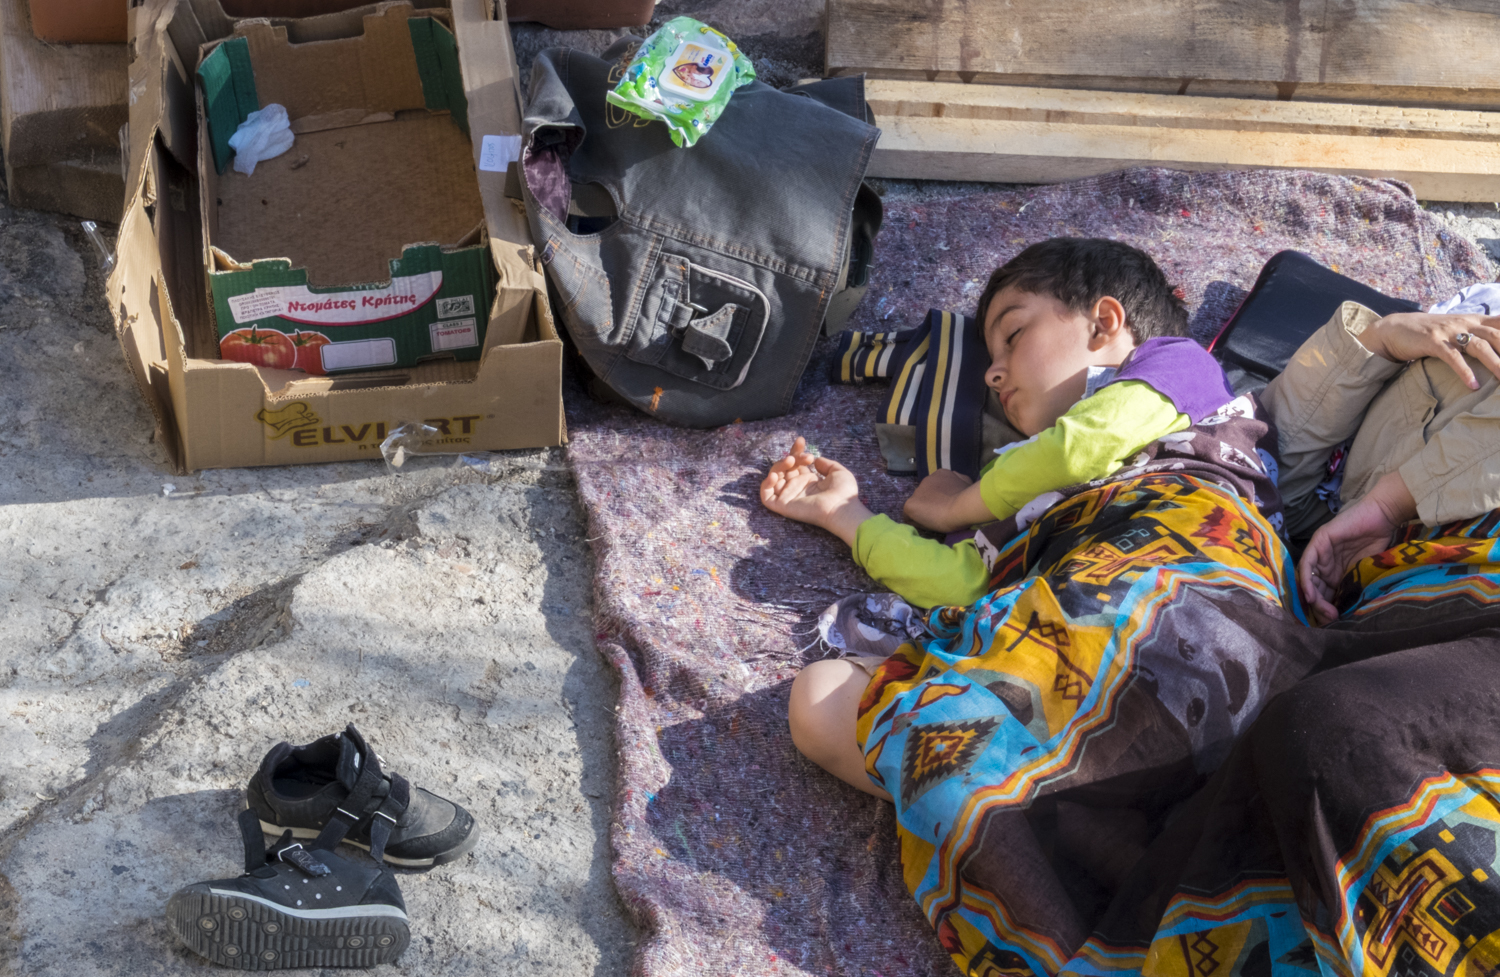 Child sleeping in a makeshift outdoor camp on the Greek island of Lesvos, 2015. © Michael S Honegger